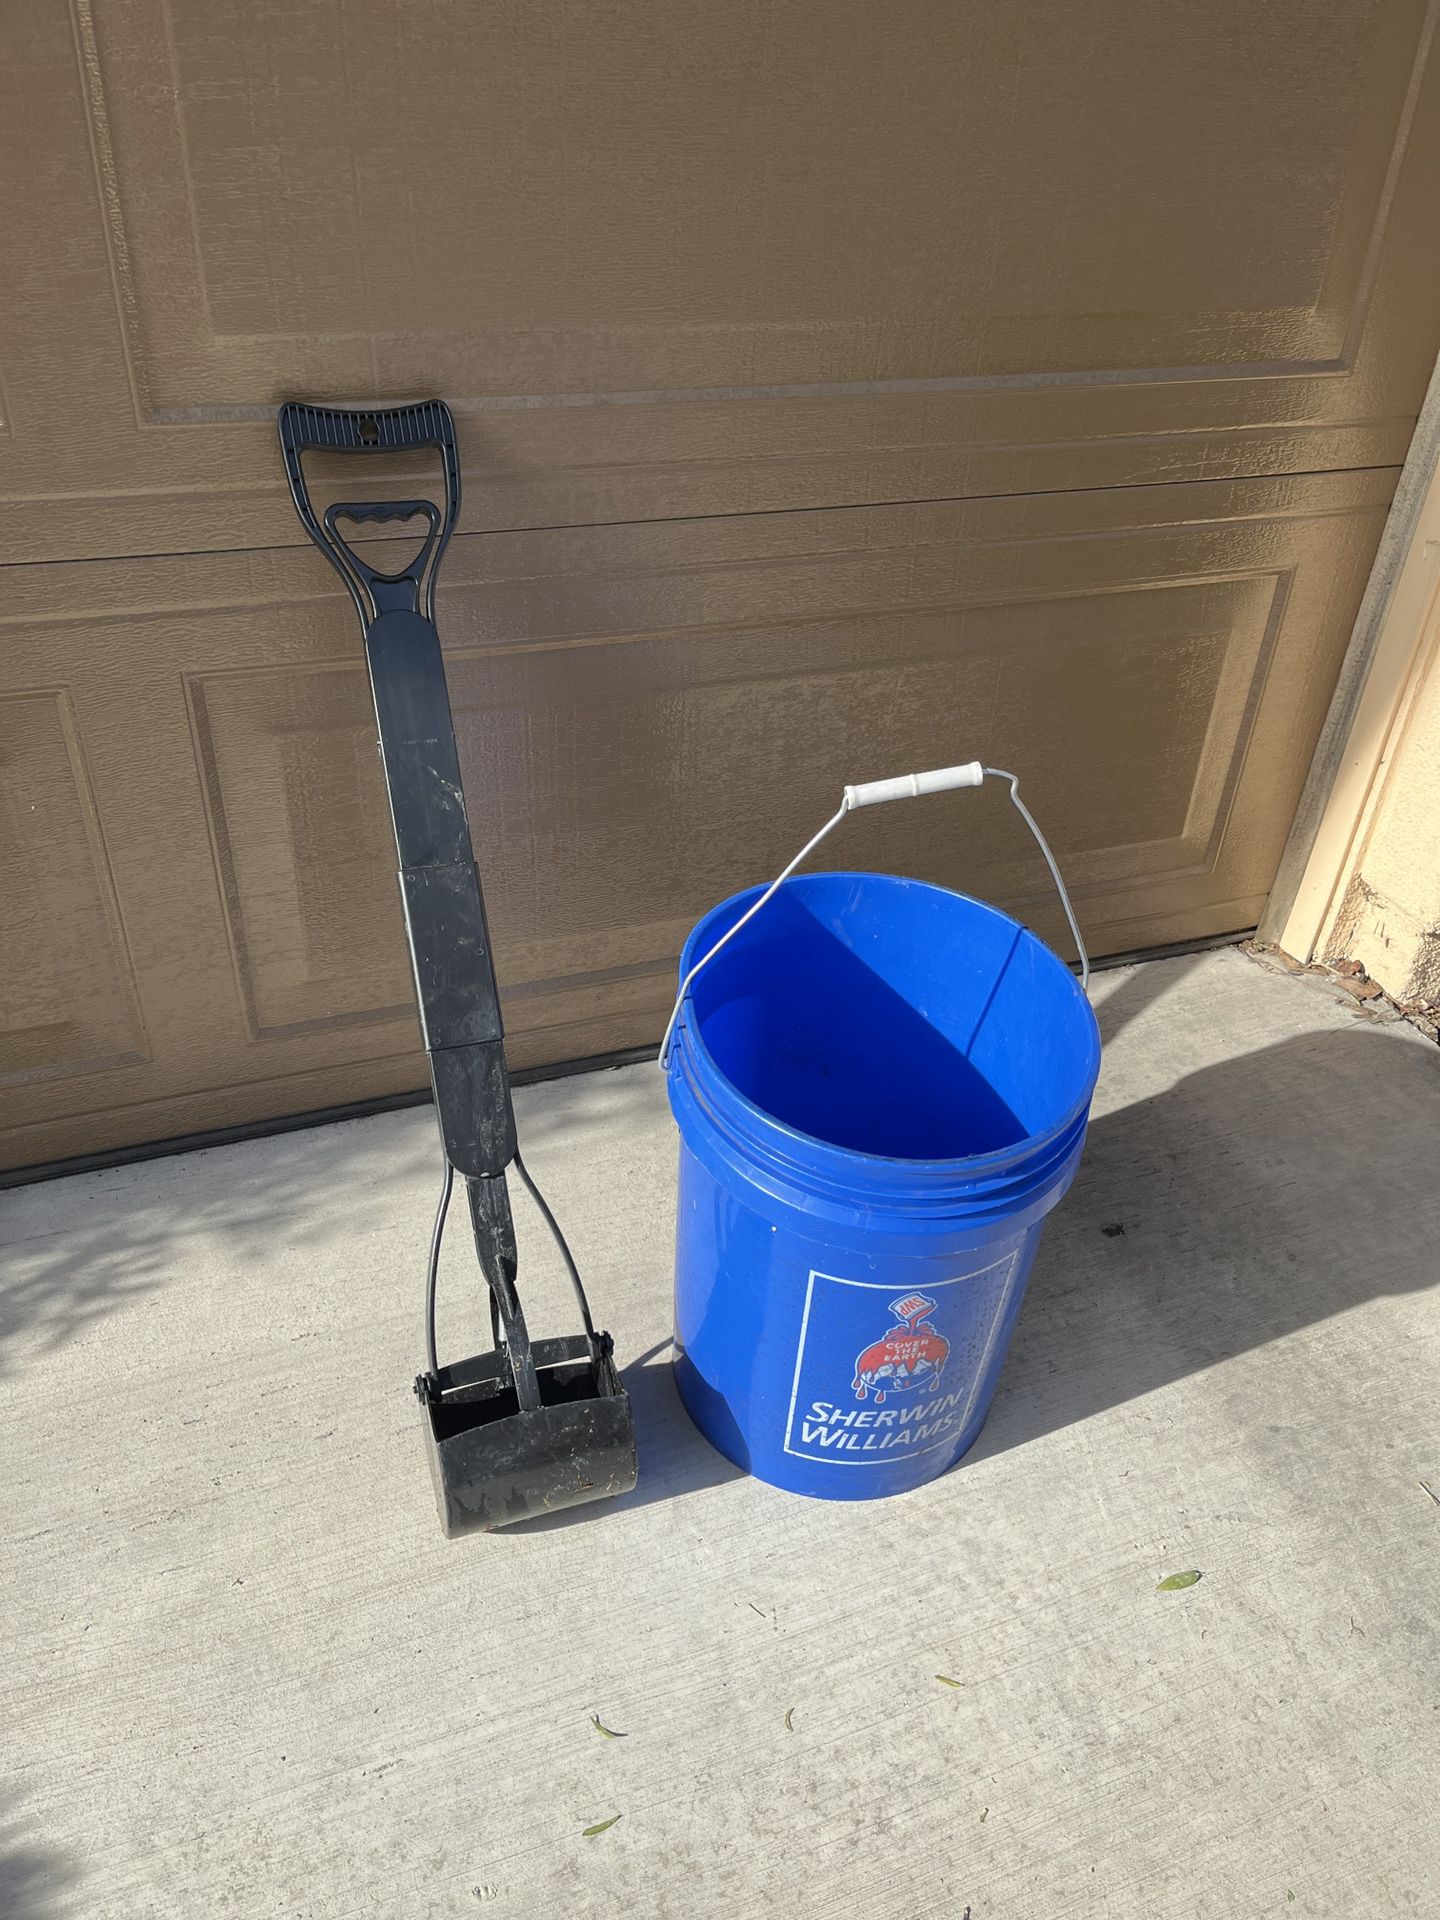 Trash Grabber / Poop Scoop Tool And Bucket. Clean. Hand Activated Jaws